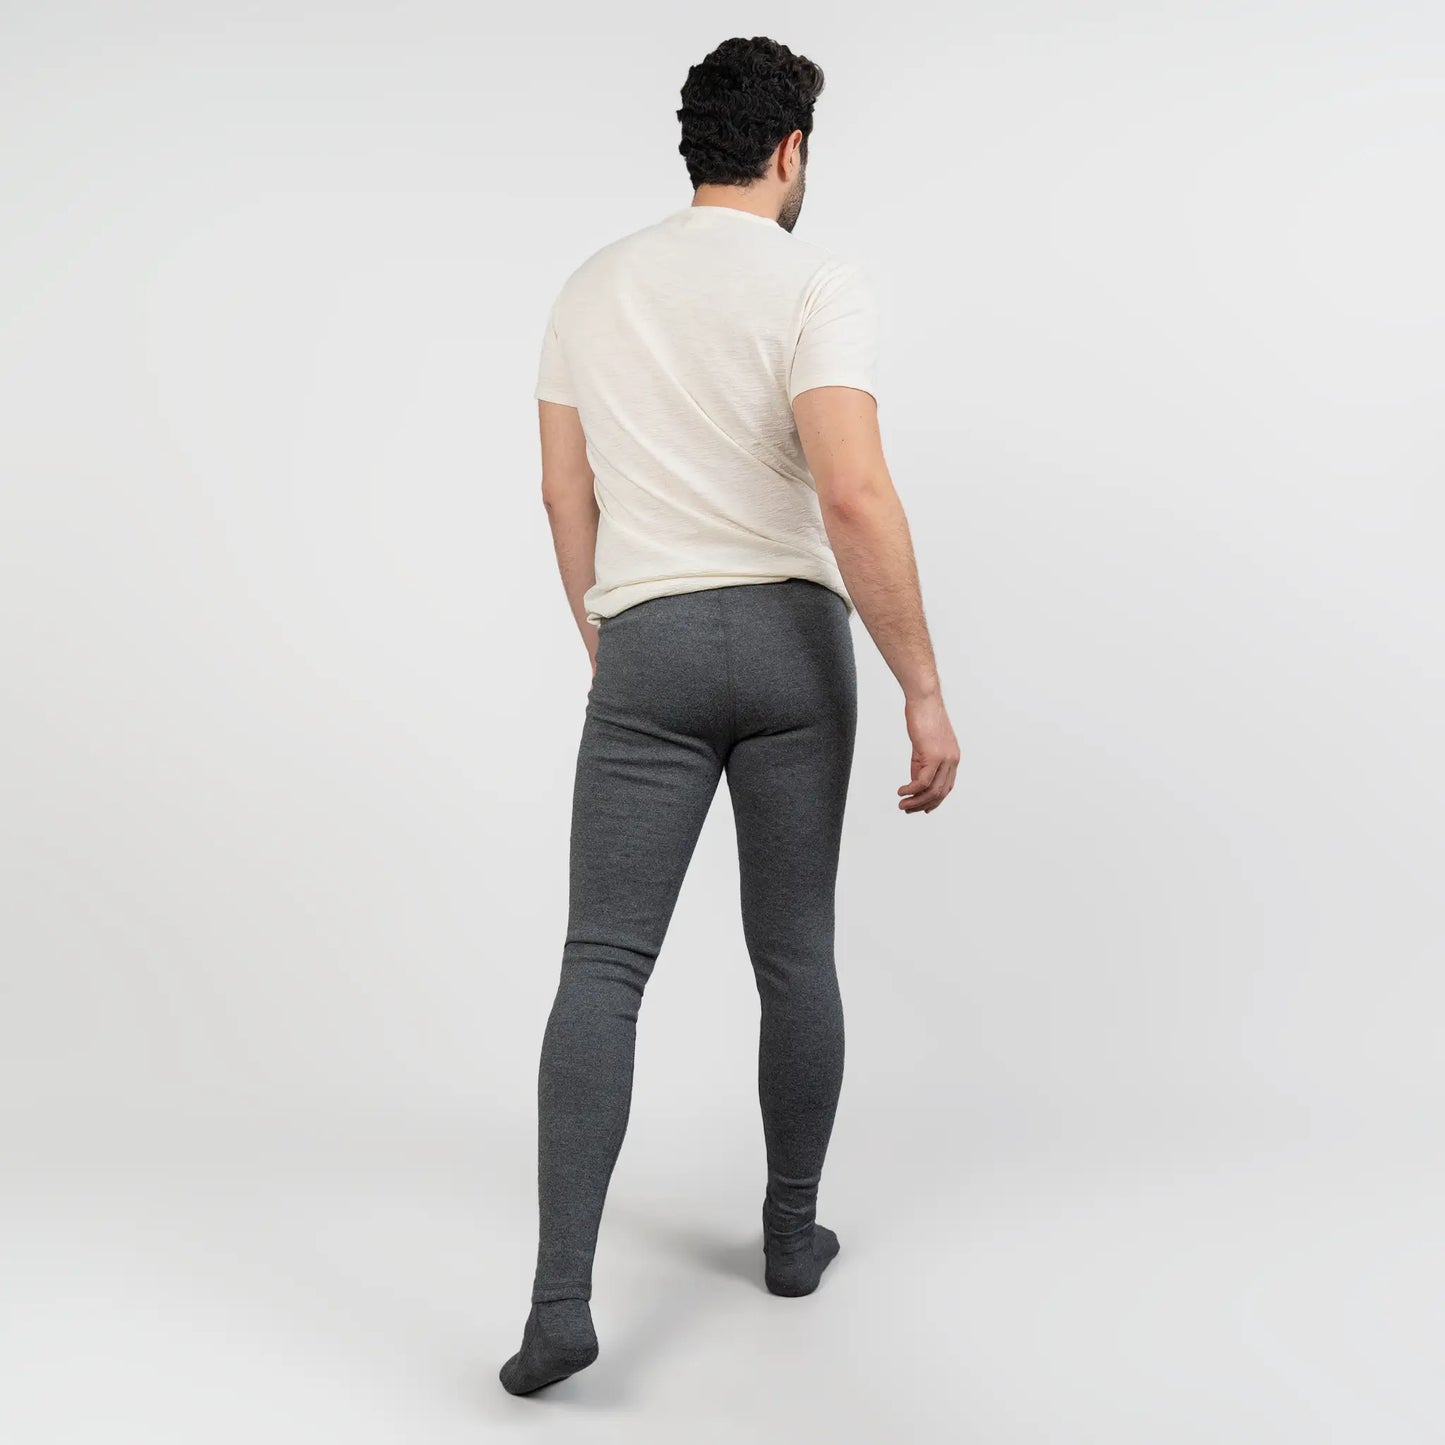 mens best midweight leggings midweight color gray